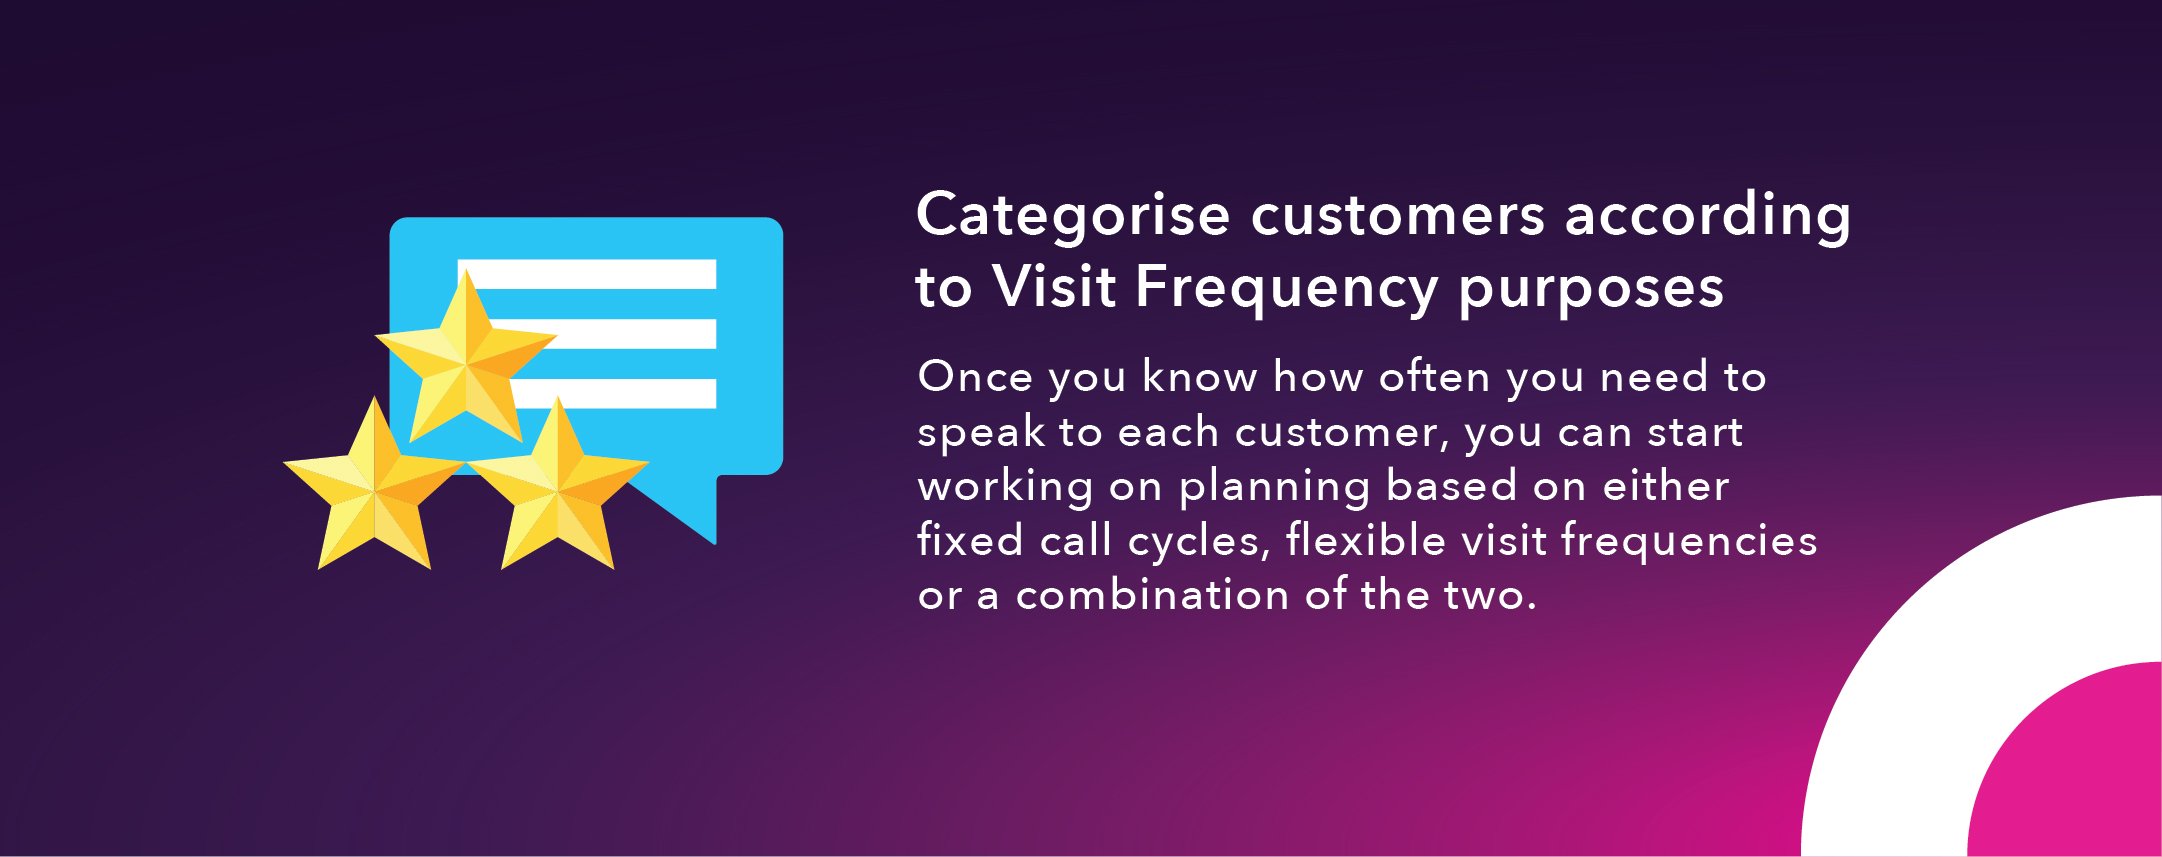 4. Categorise customers according to Visit Frequency purposes